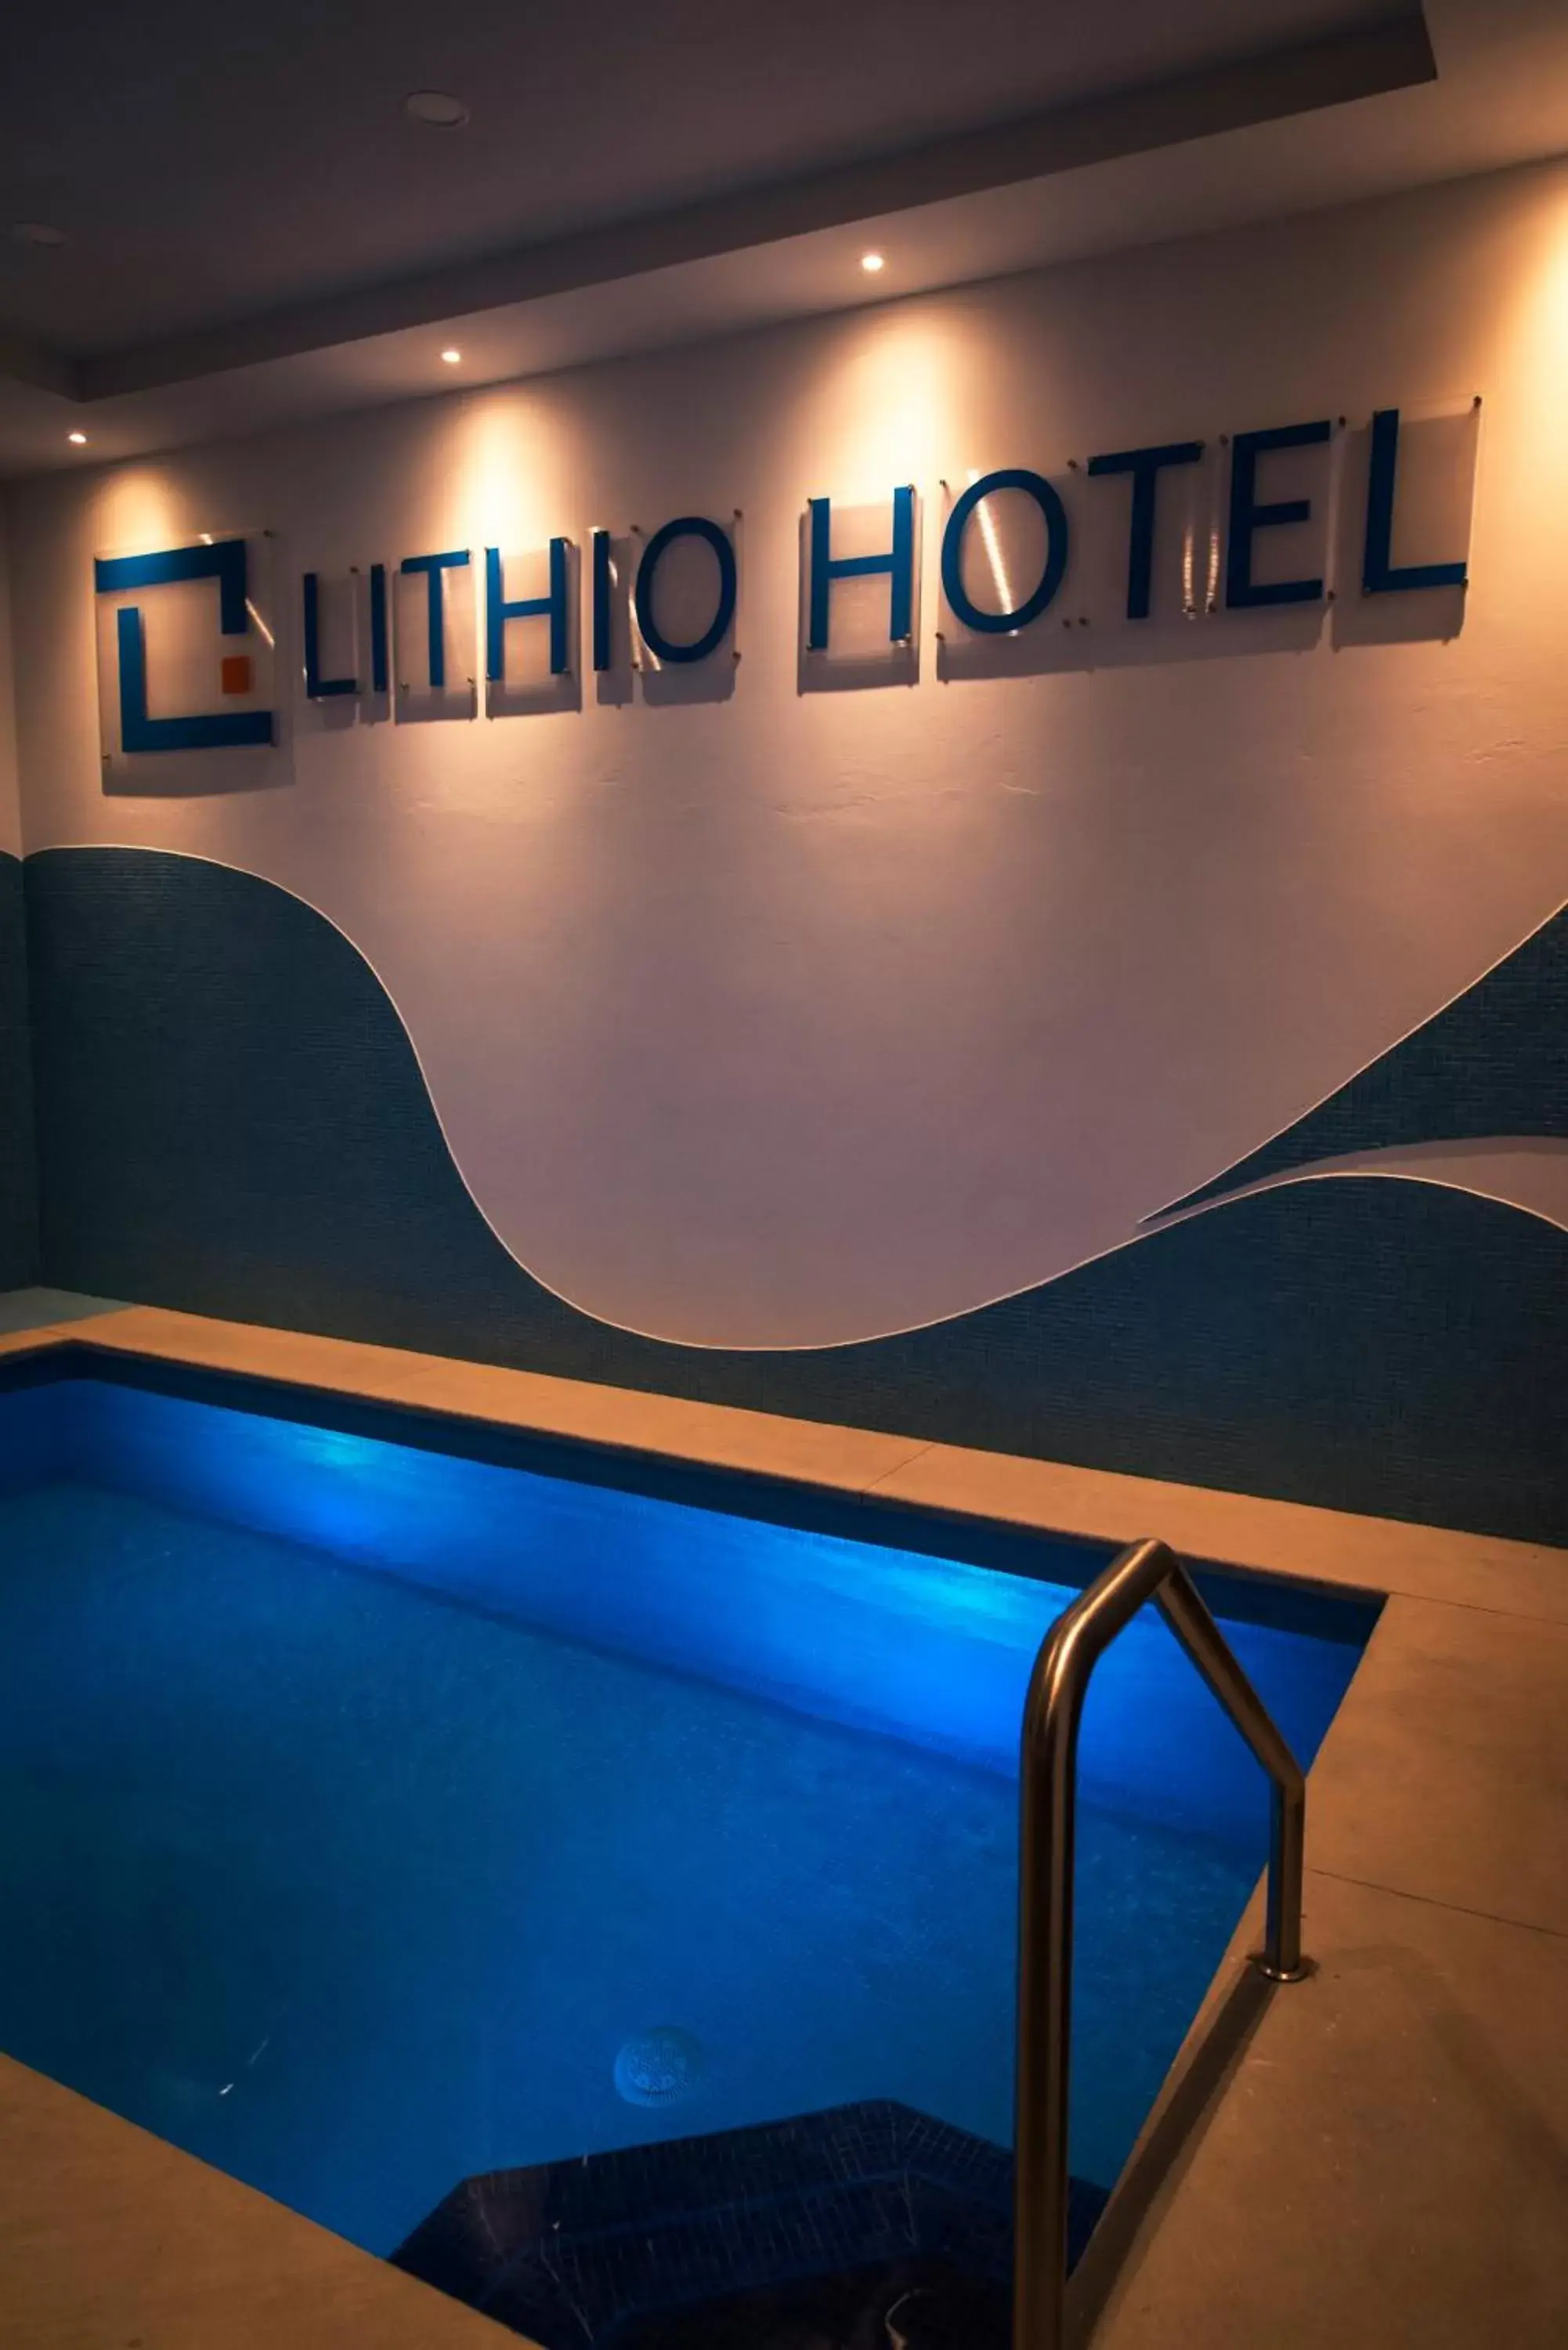 Swimming Pool in Lithio Hotel